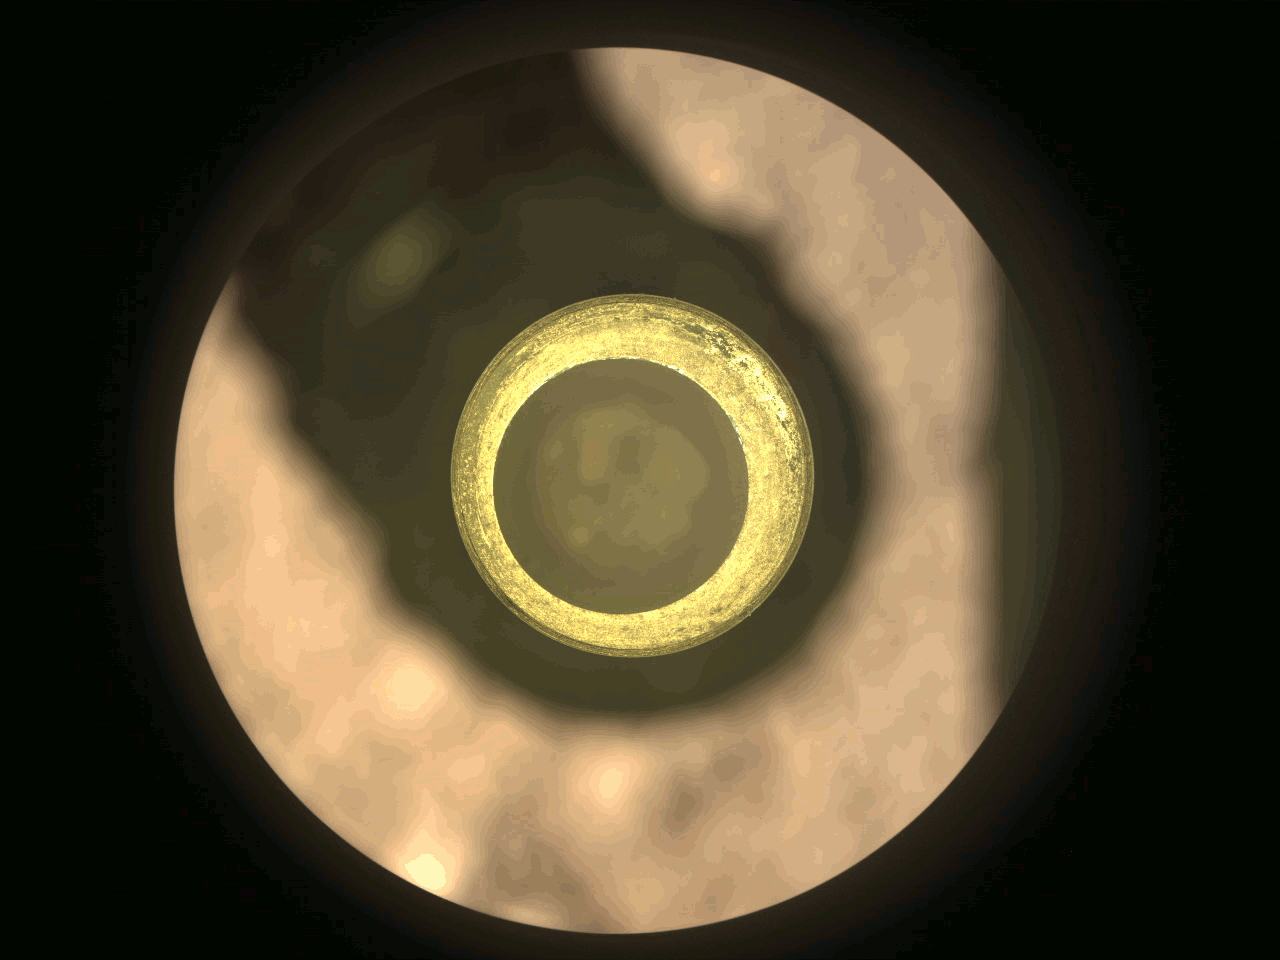 Figure 7: The first cored sample of Mars rock is visible (at center) inside a titanium sample collection tube in this from the Sampling and Caching System Camera (known as CacheCam) of NASA's Perseverance rover. The image was taken on Sept. 6, 2021 (the 194th sol, or Martian day, of the mission), prior to the system attaching and sealing a metal cap onto the tube (video credit: NASA/JPL-Caltech)